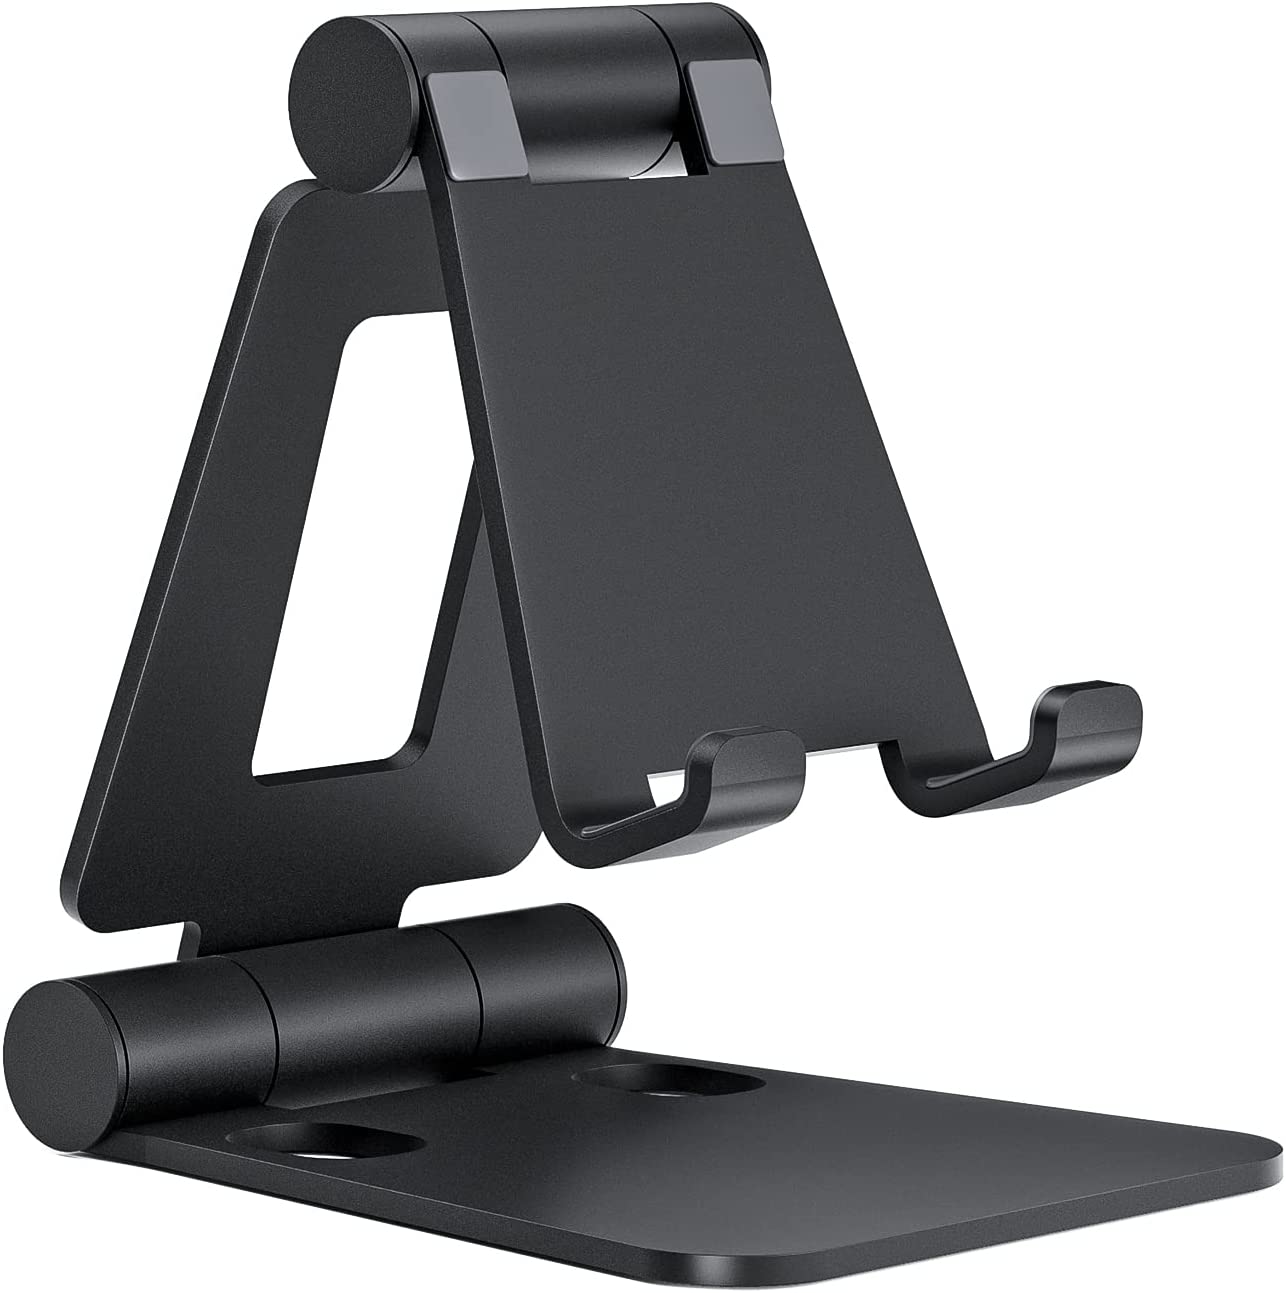 Nulaxy A4 Universal Case Friendly Collapsible Phone Holder